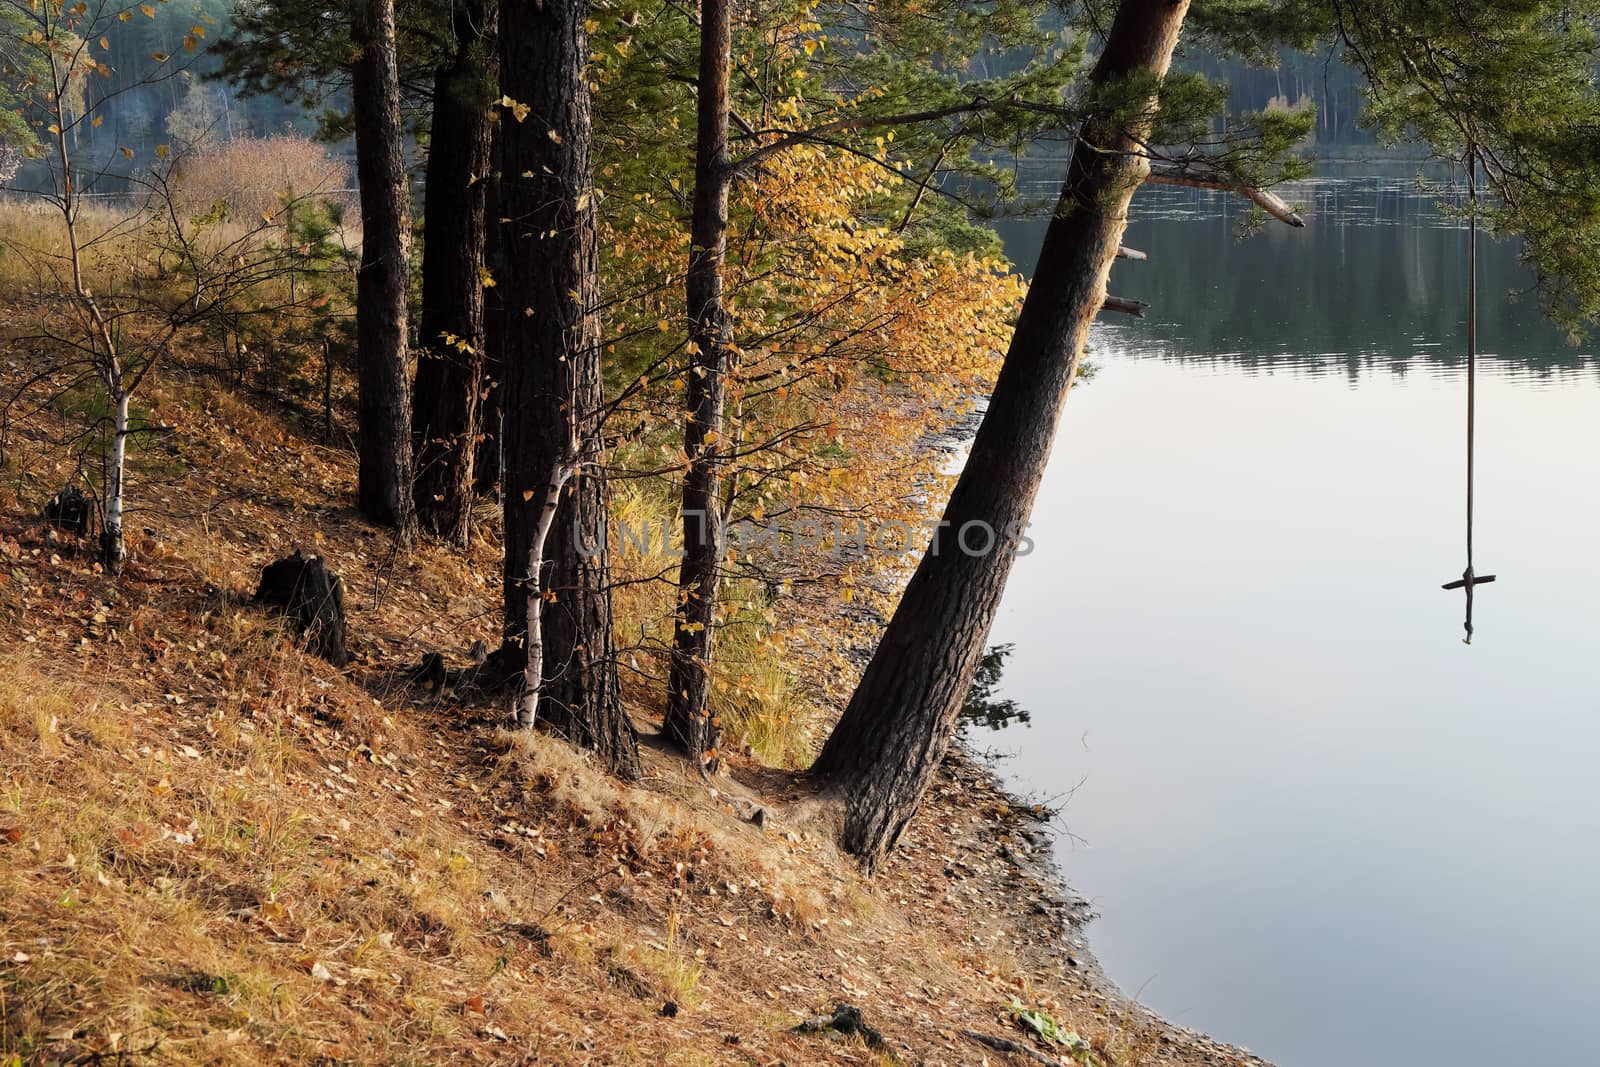 The shore of the forest lake in the autumn with a tarsar for jumping into the water